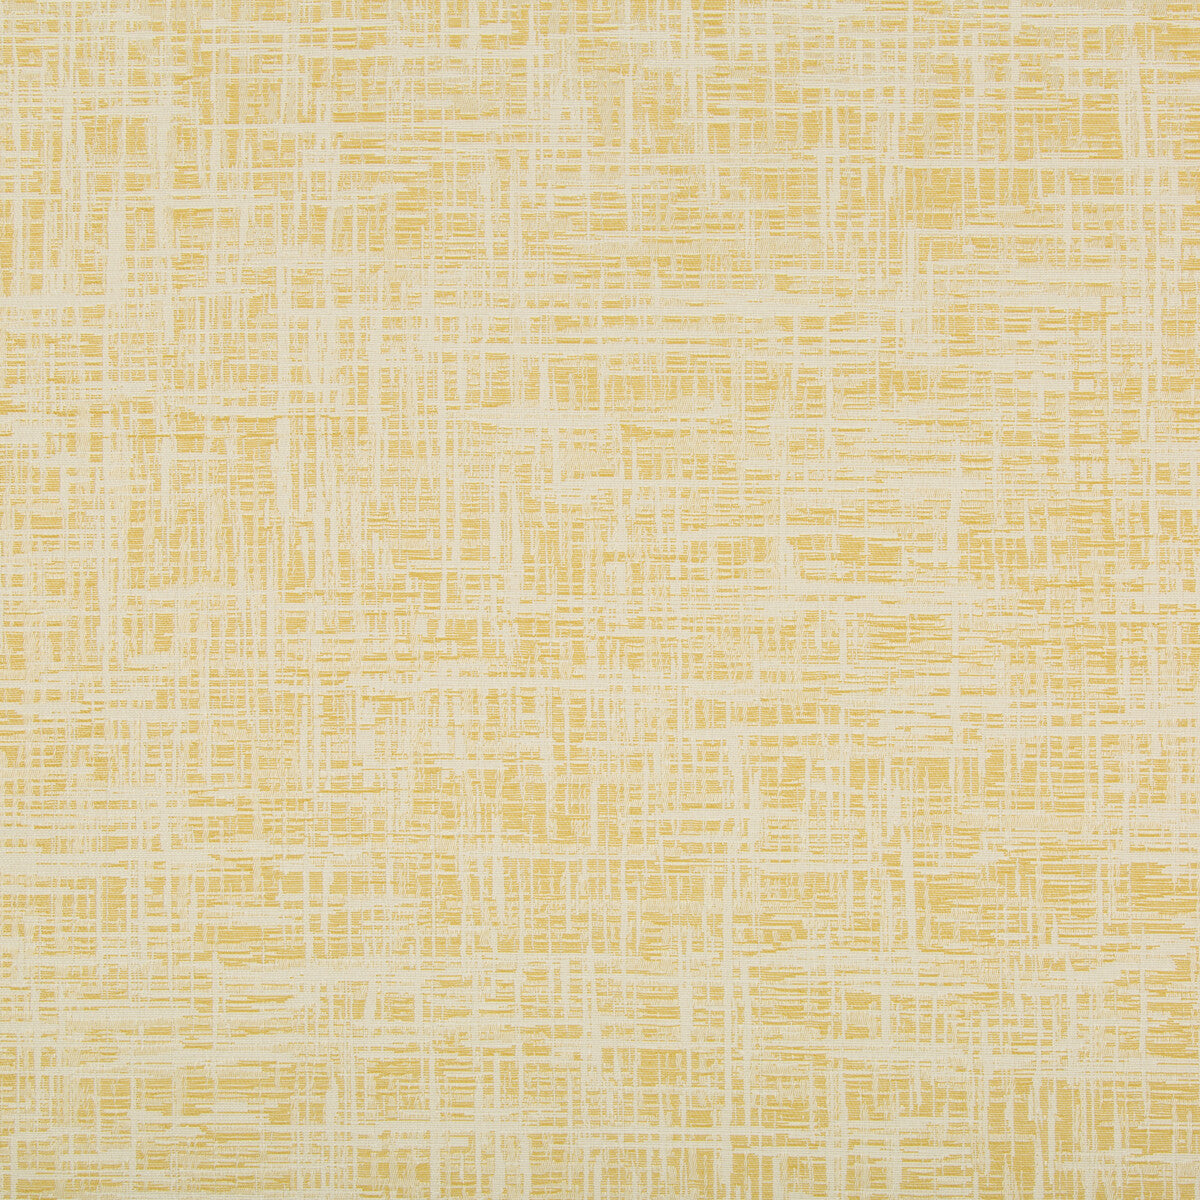 Dejo fabric in limonata color - pattern 35045.4.0 - by Kravet Contract in the Gis Crypton collection